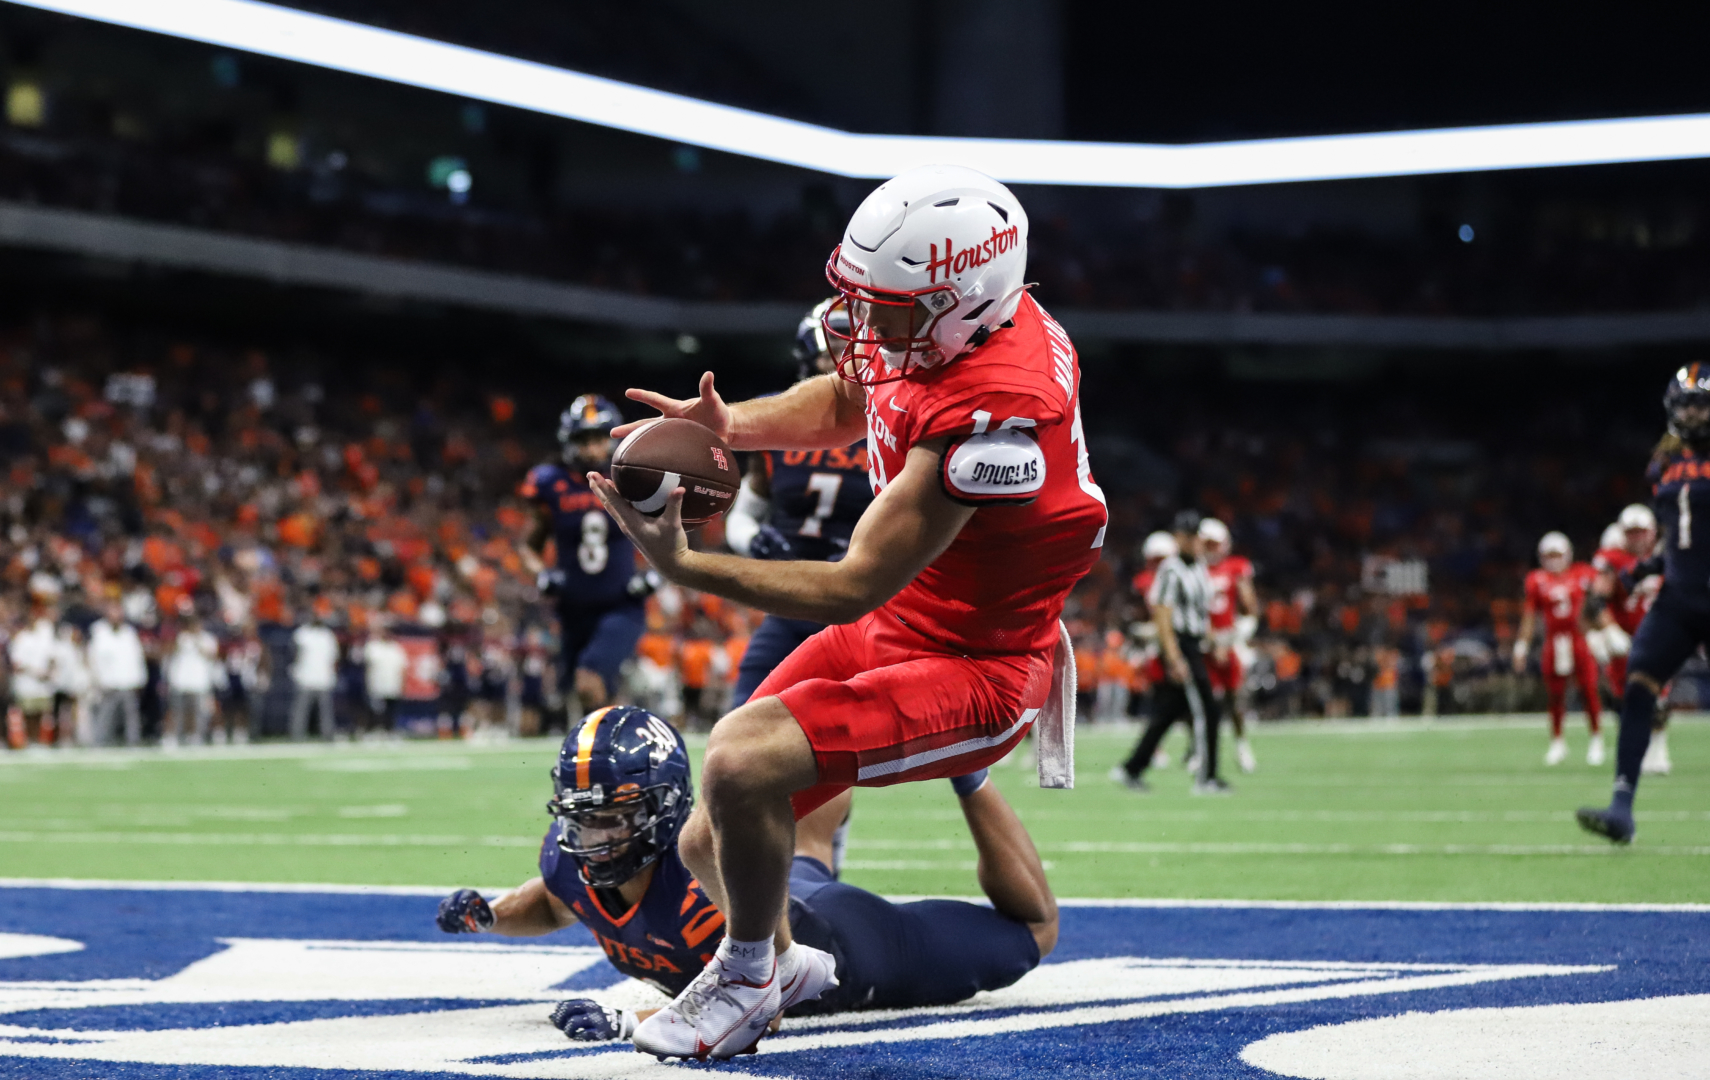 UH football sophomore receiver Joseph Manjack IV hauls in a one-handed touchdown catch in the fourth quarter of the Cougars' victory over UTSA on Saturday at the Alamodome. | Sean Thomas/The Cougar